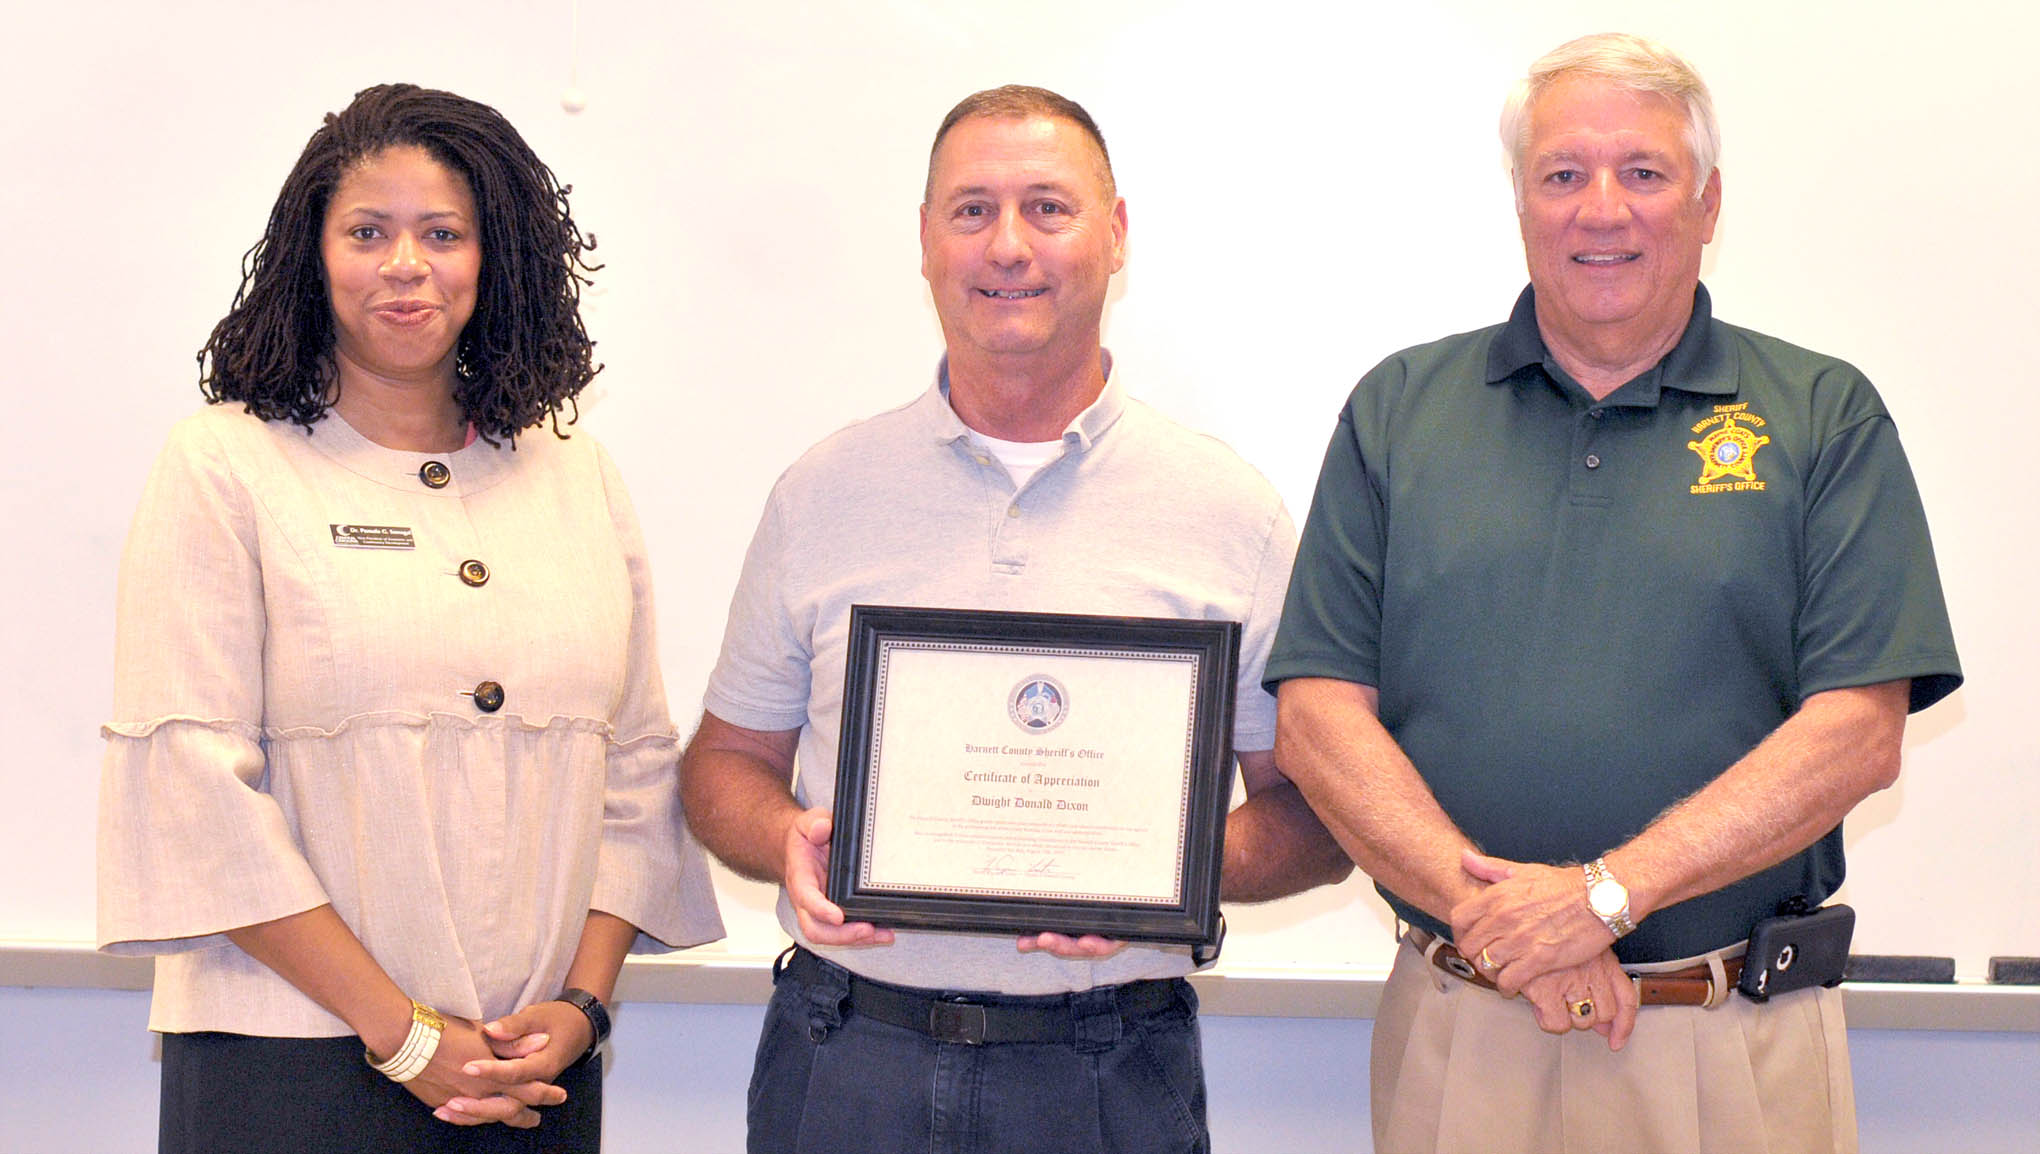 Read the full story, CCCC's Dixon receives salute from Harnett Sheriff's Office